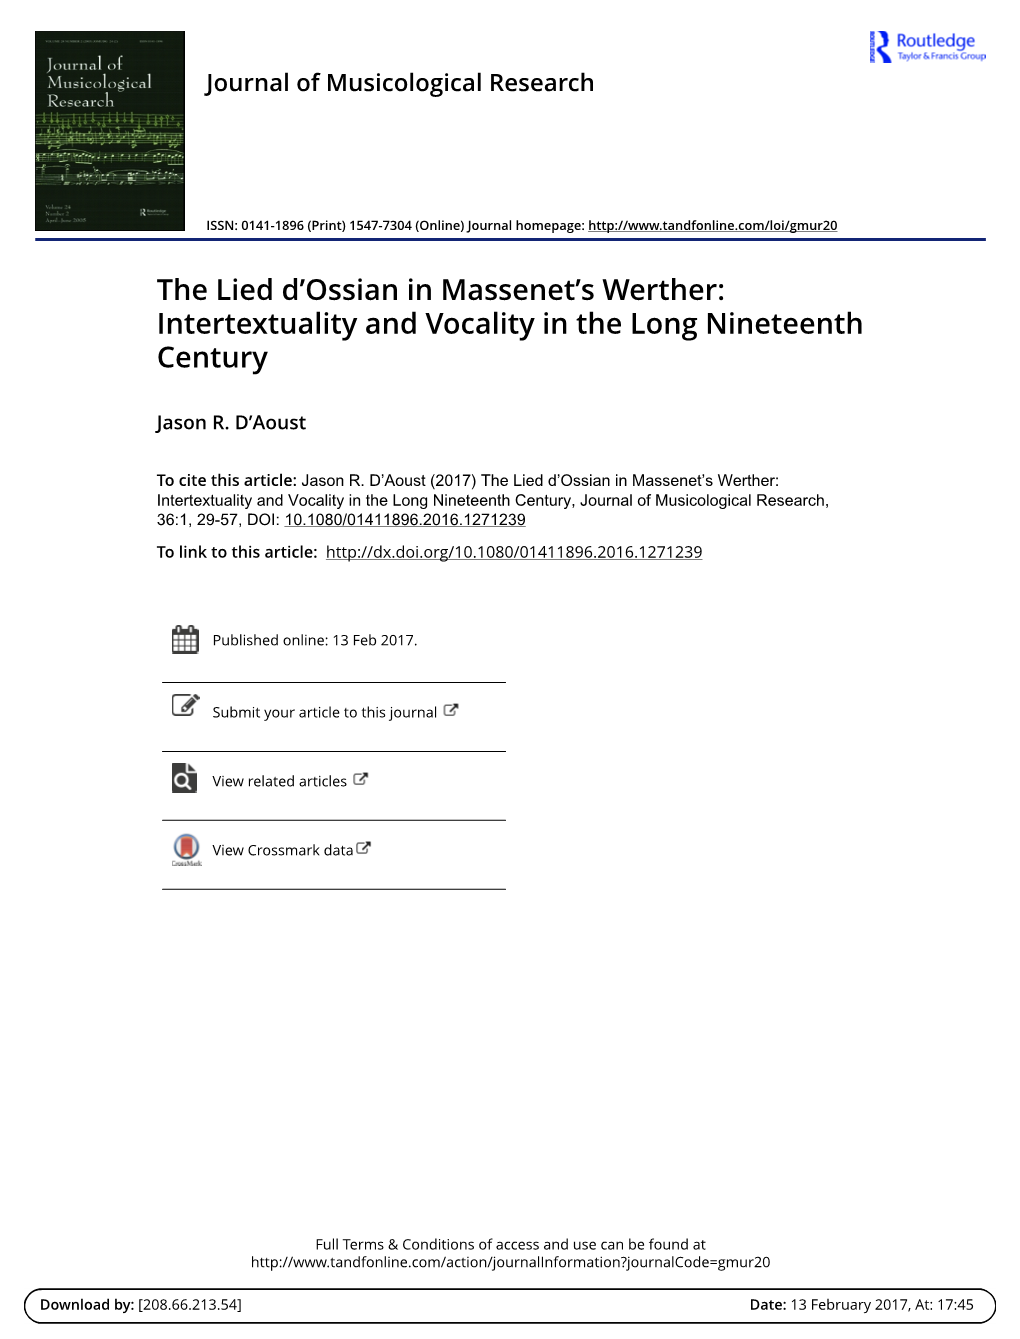 The Lied D'ossian in Massenet's Werther: Intertextuality and Vocality In